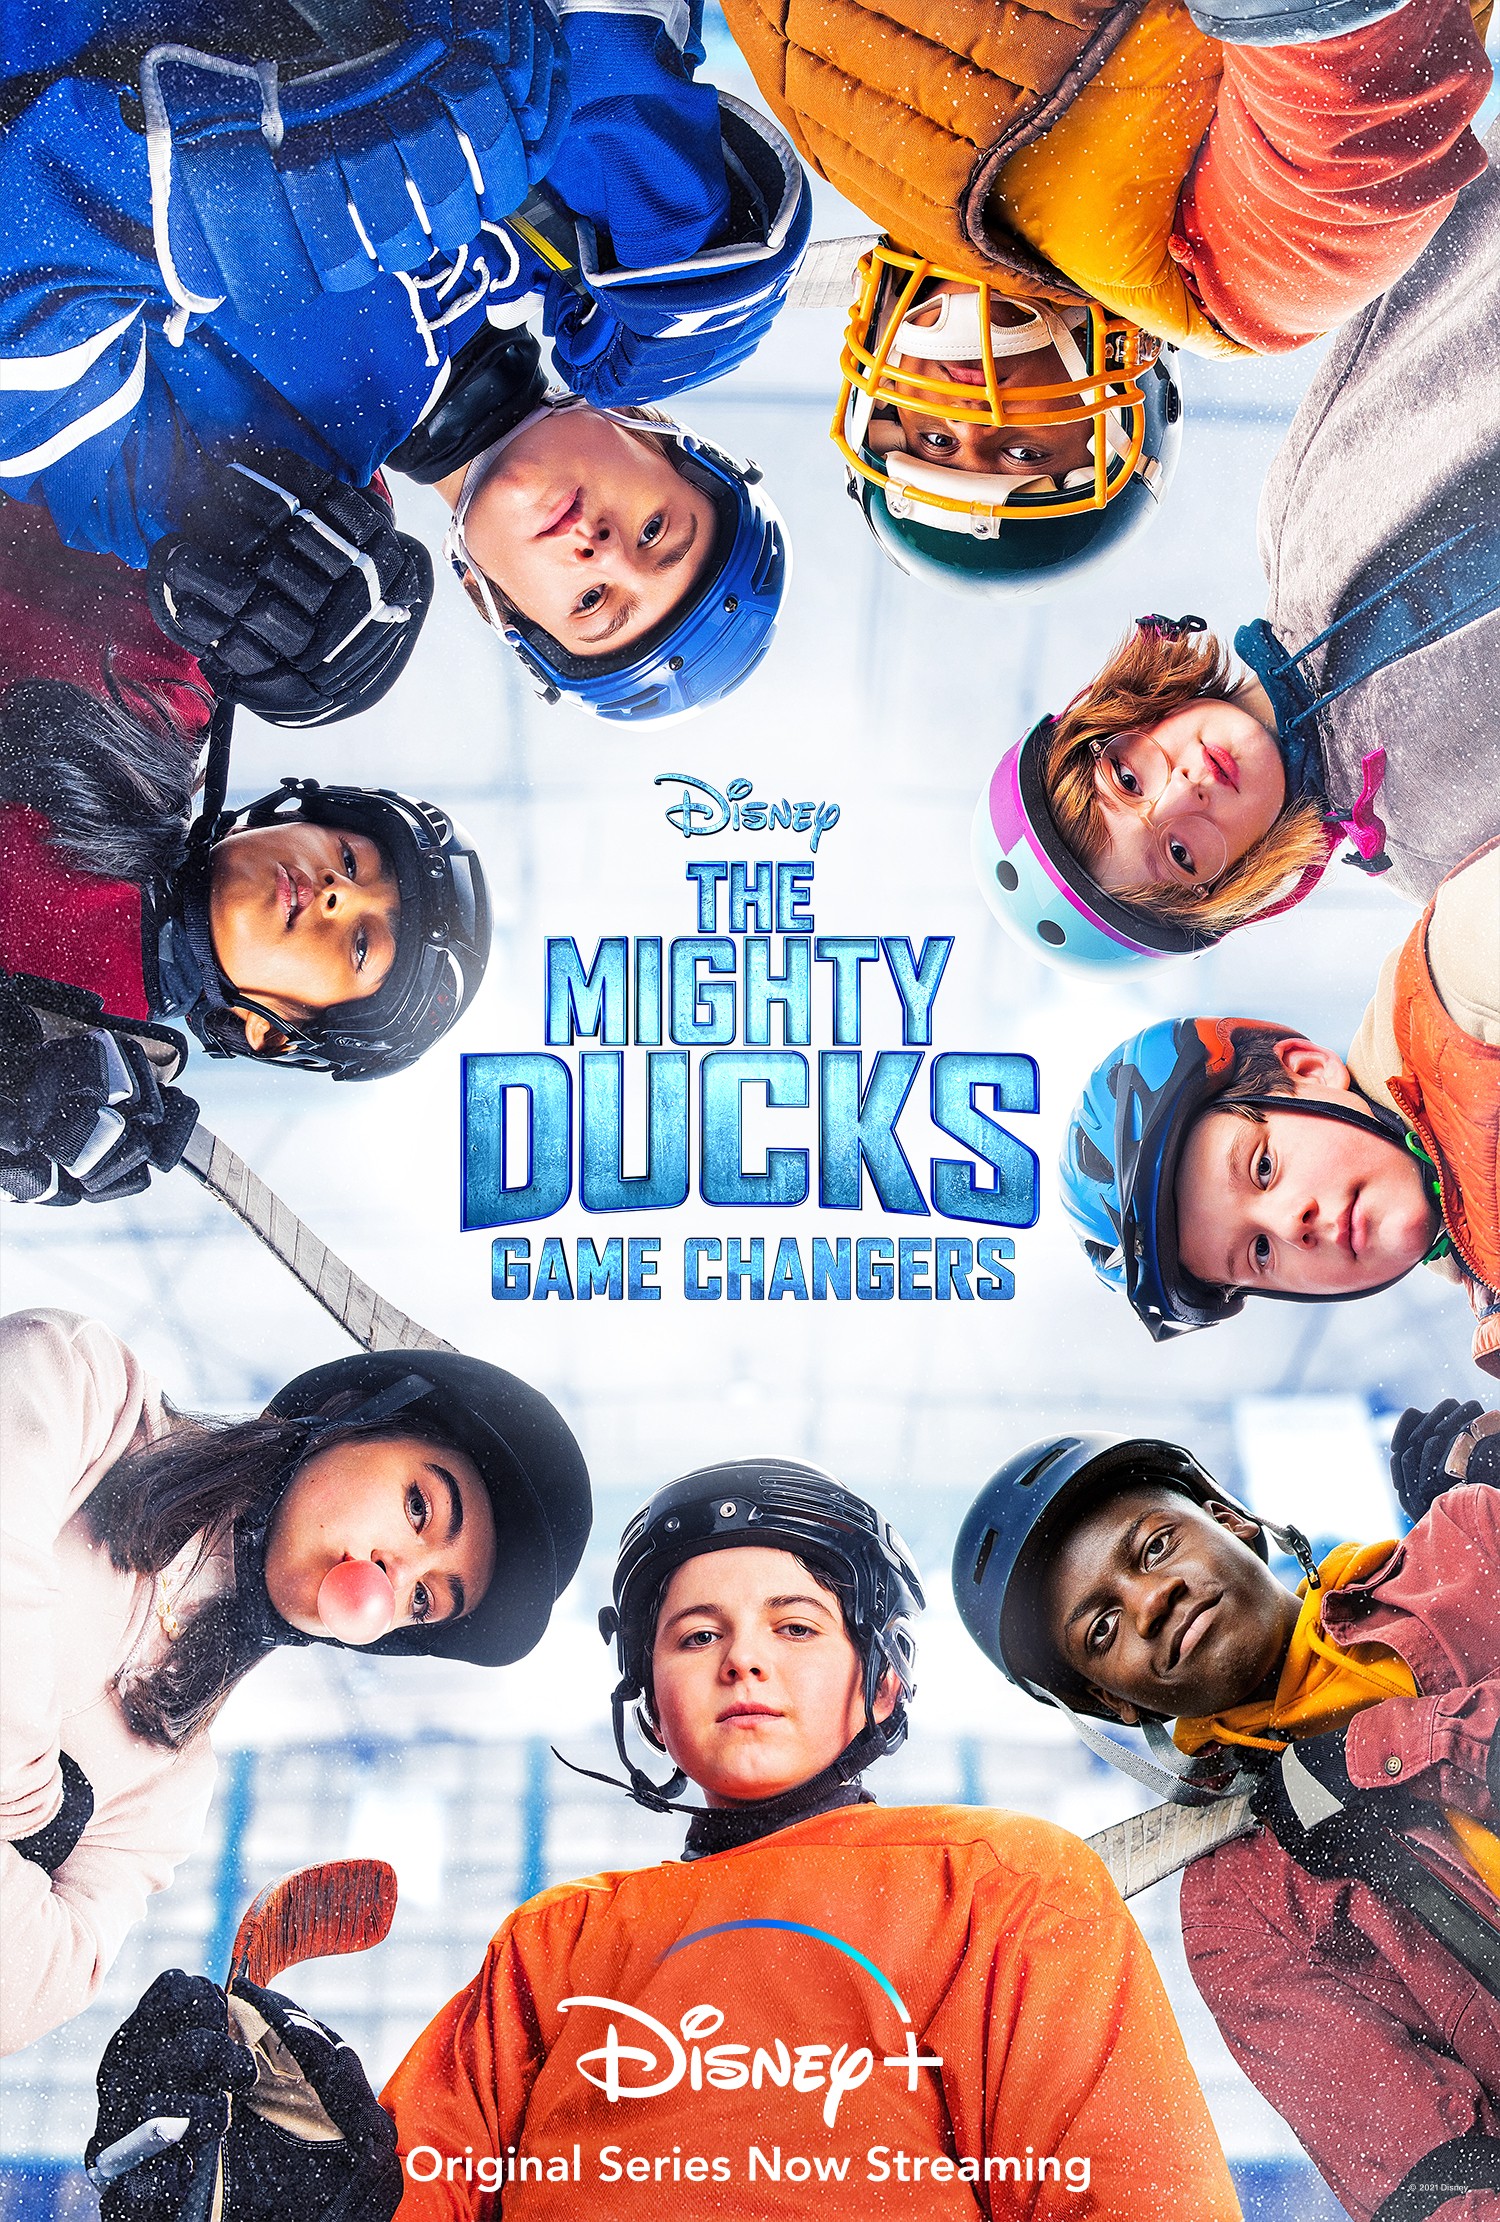 The Mighty Ducks: Game Changers': 12 Easter Eggs You May Have